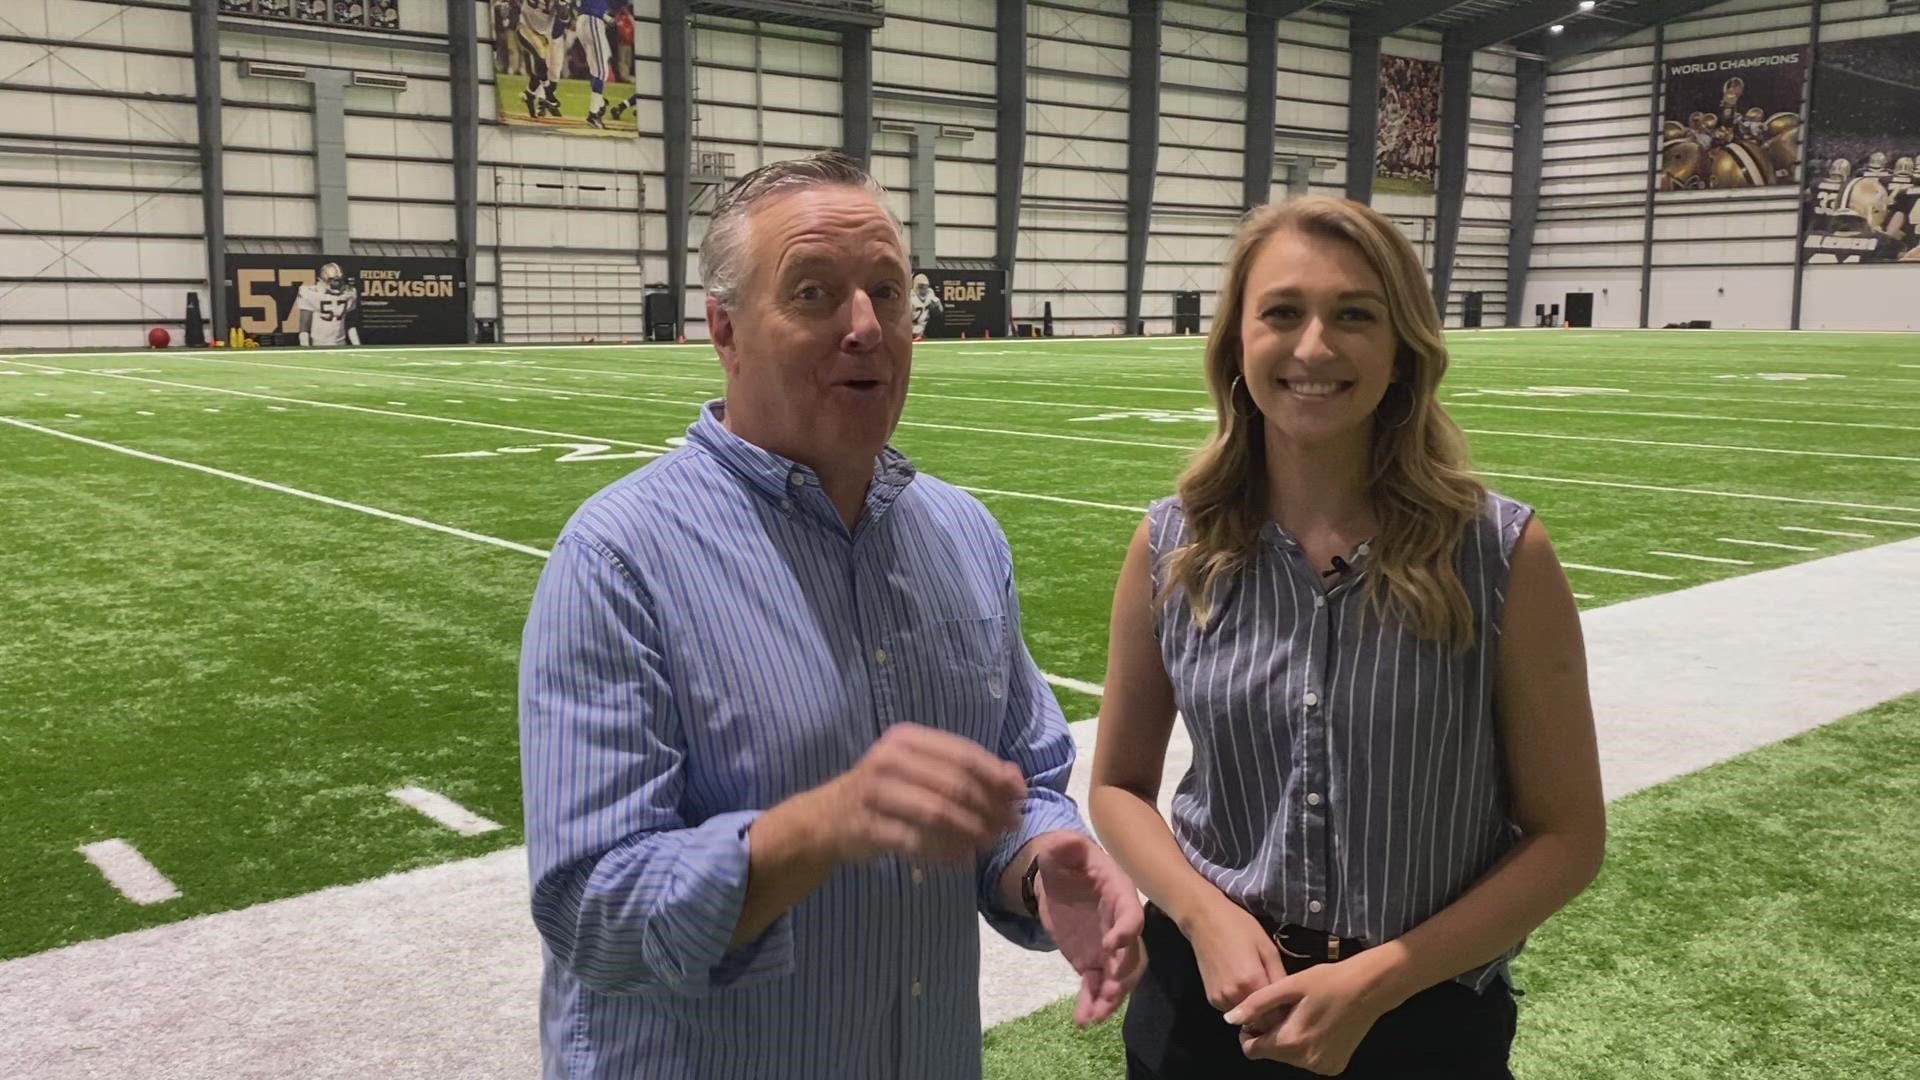 Doug and Brooke say that some heated play between offensive and defensive lines was the highlight. Video also showed spirited play as receivers faced off with DBs.